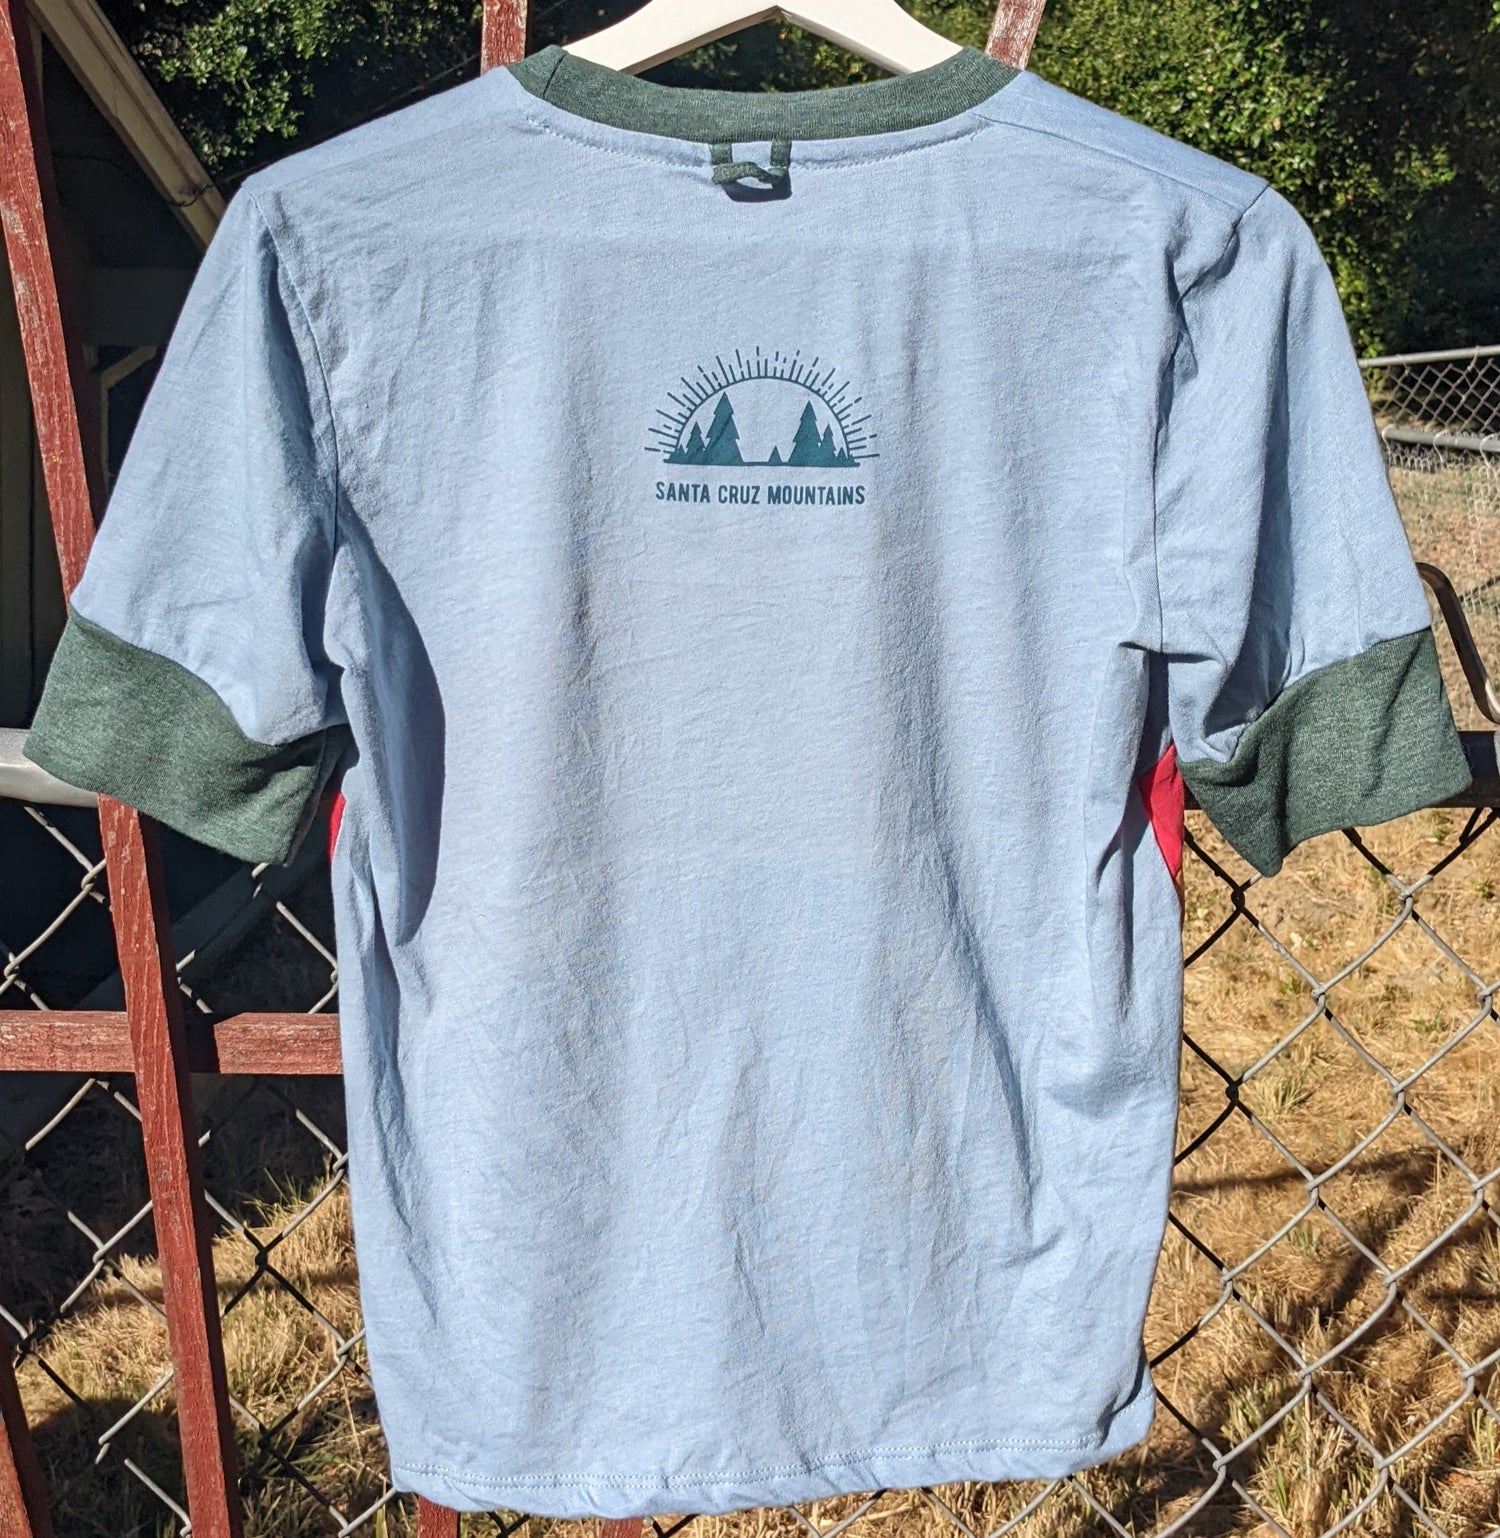 Blue and green shirt by Camp Collection with Santa Cruz Mountains logo mark on back,  created by Jackie from Present